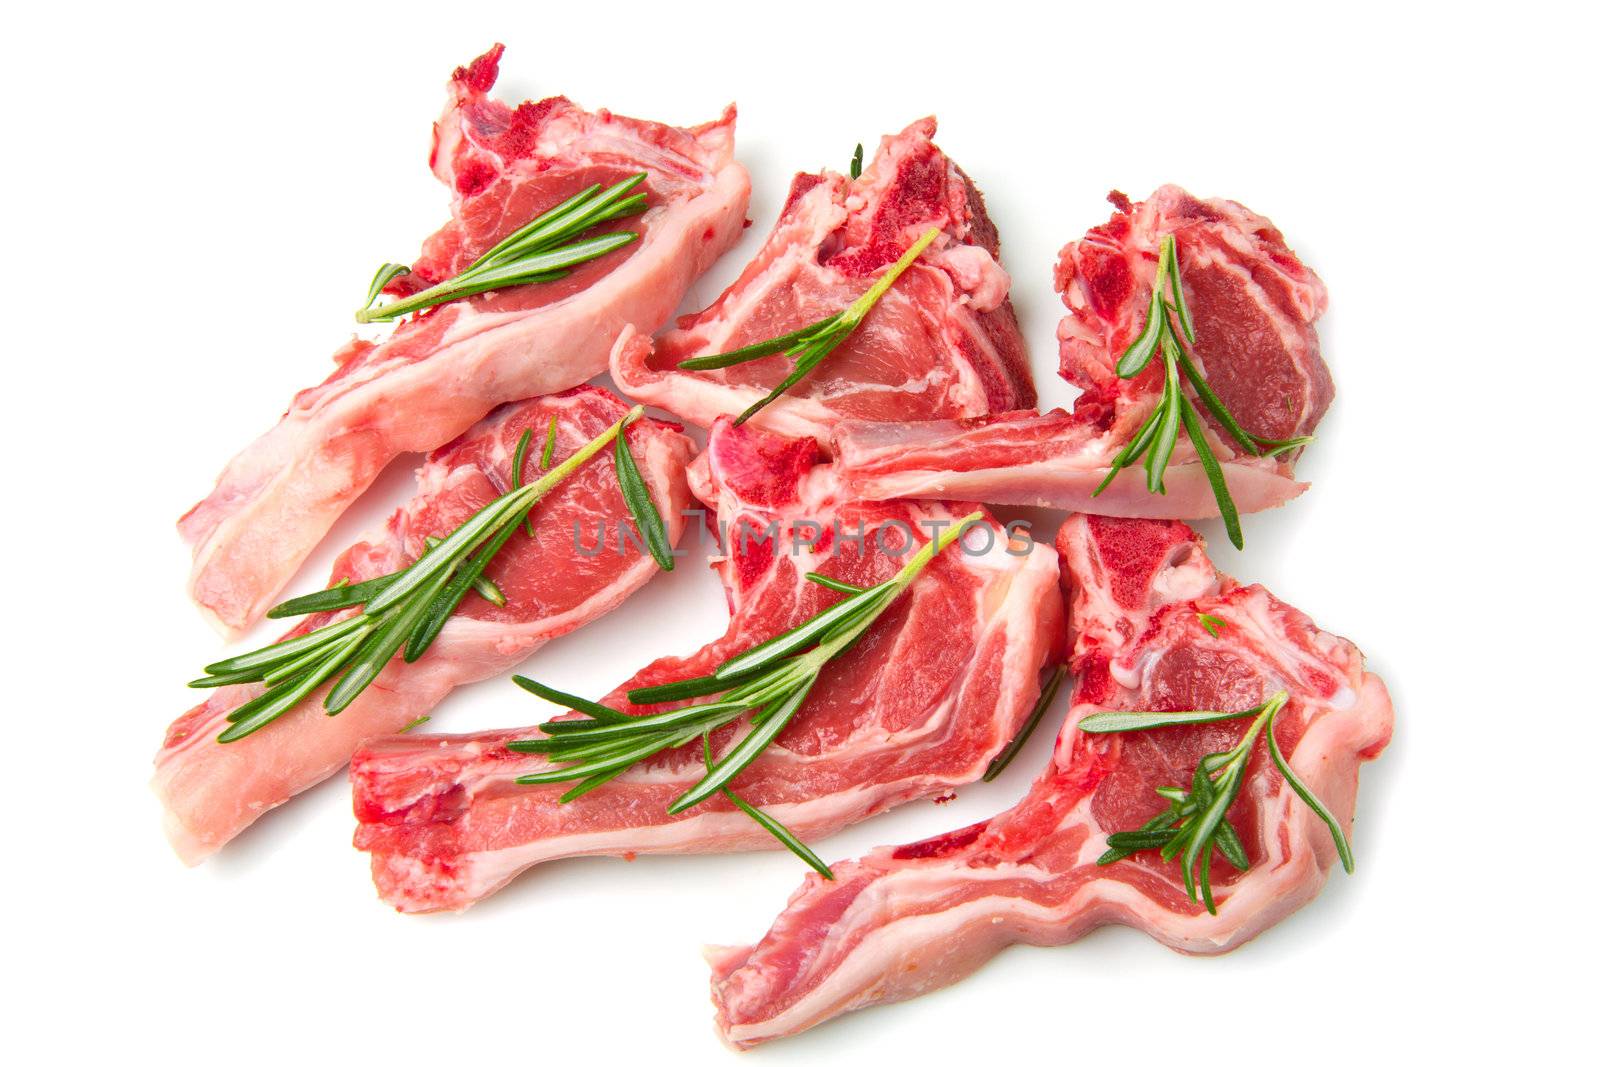 Racks of lamb, ready for cooking, with fresh rosemary